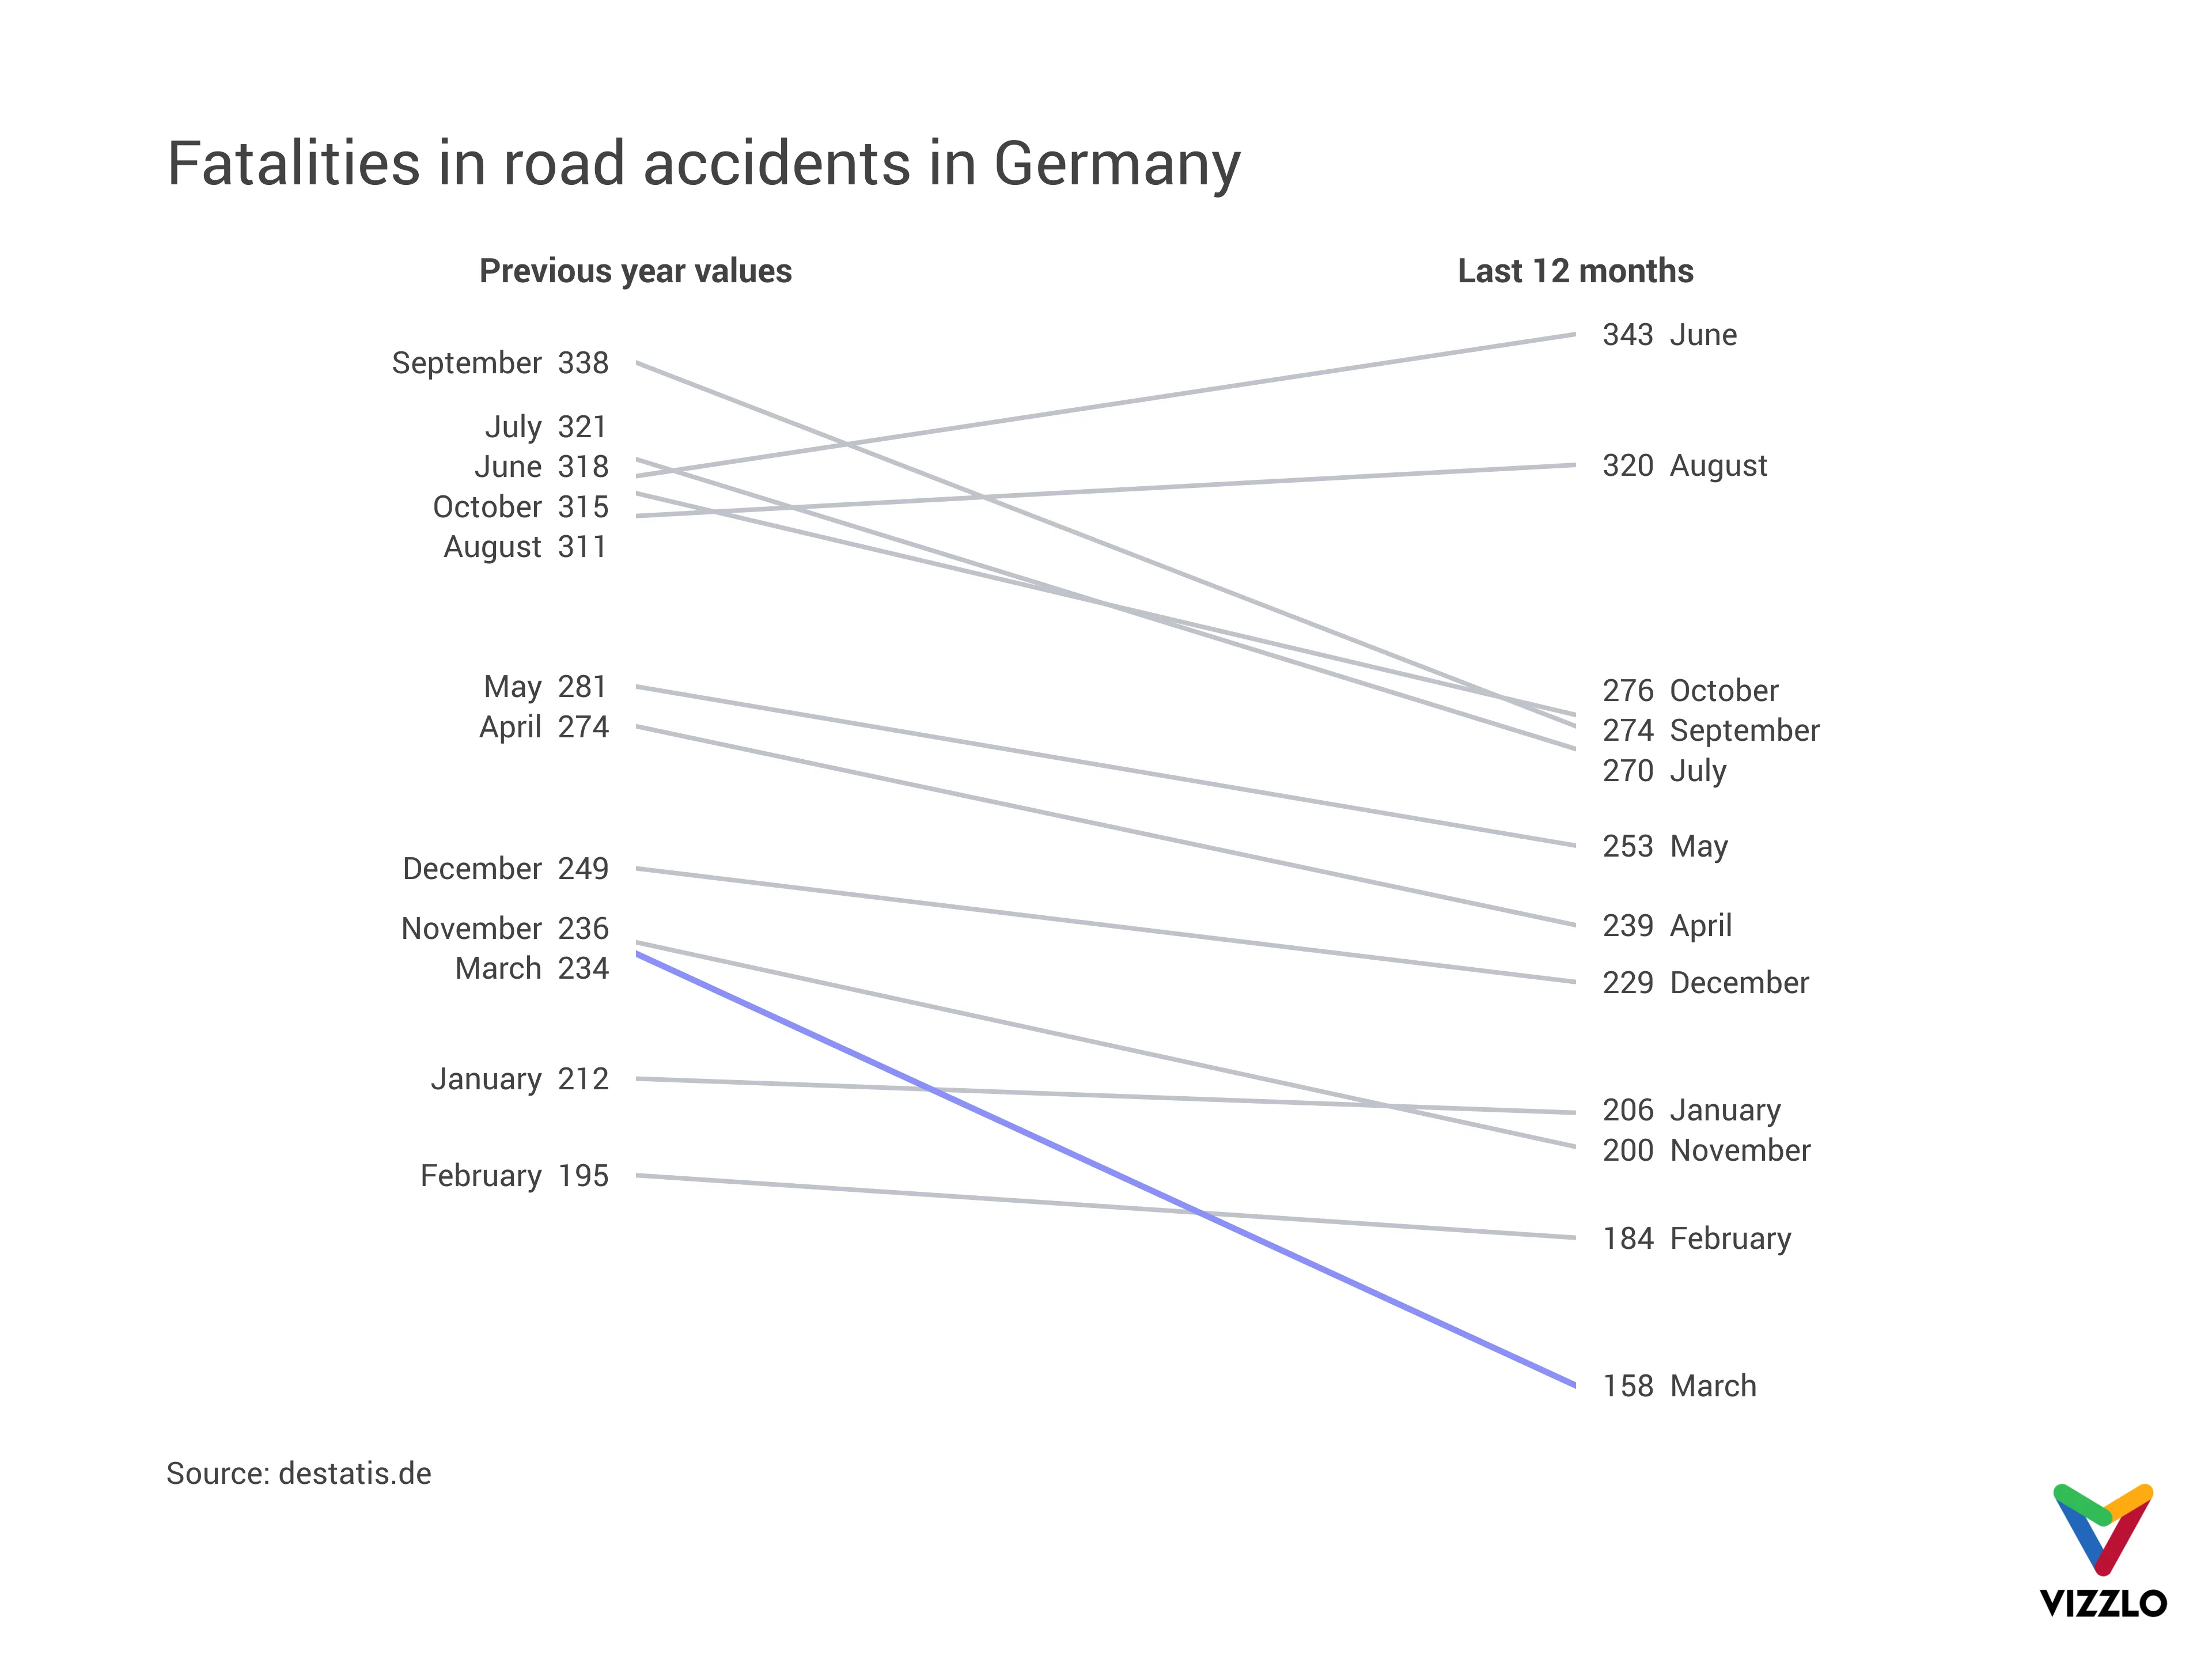 Fatalities in road accidents in Germany